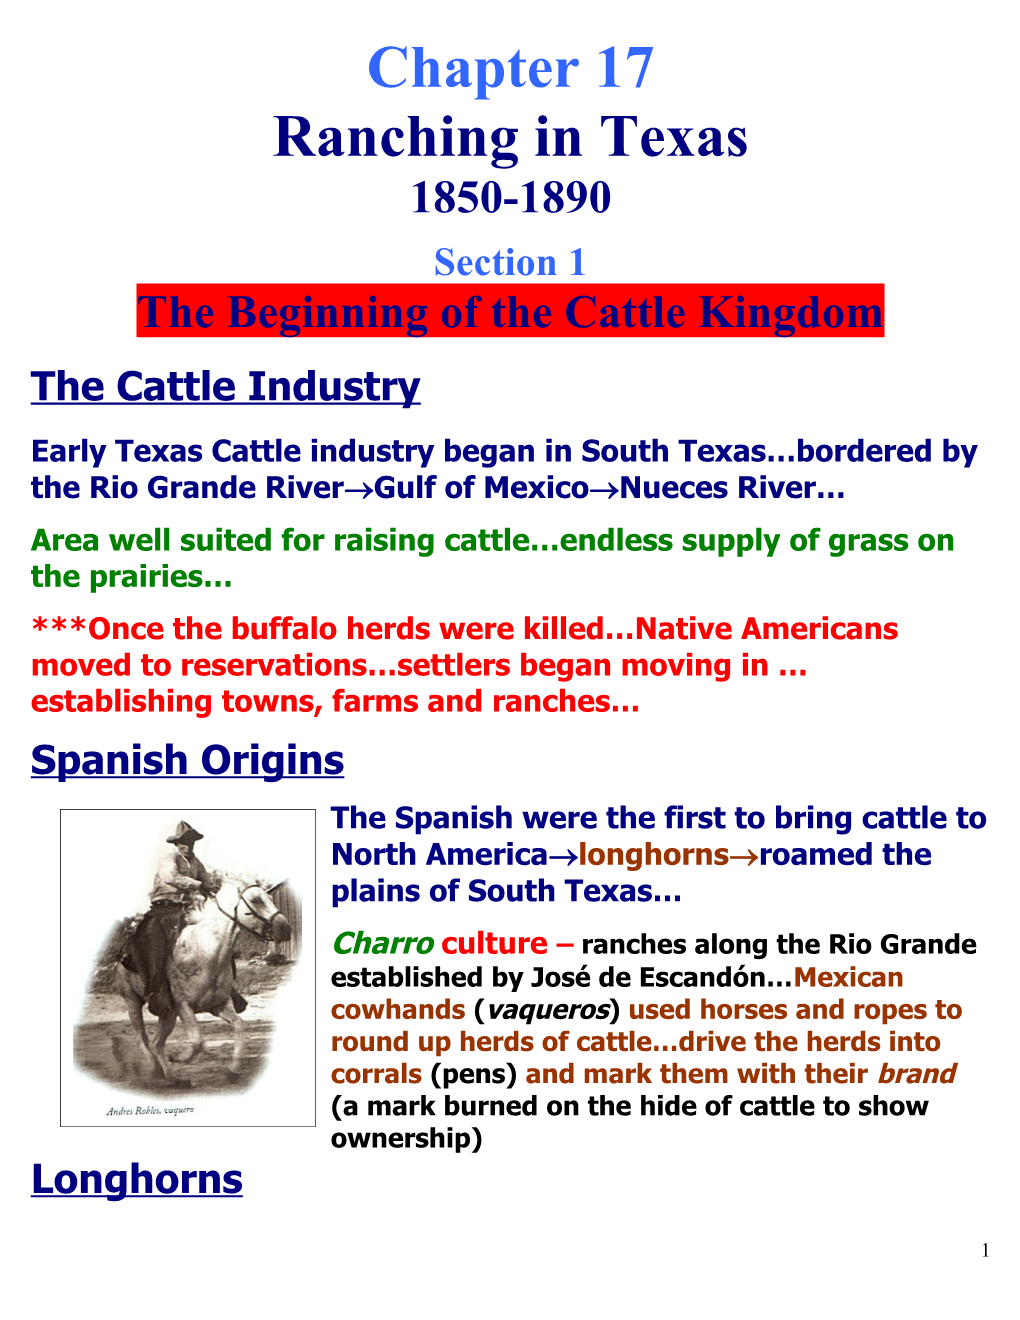 The Beginning of the Cattle Kingdom